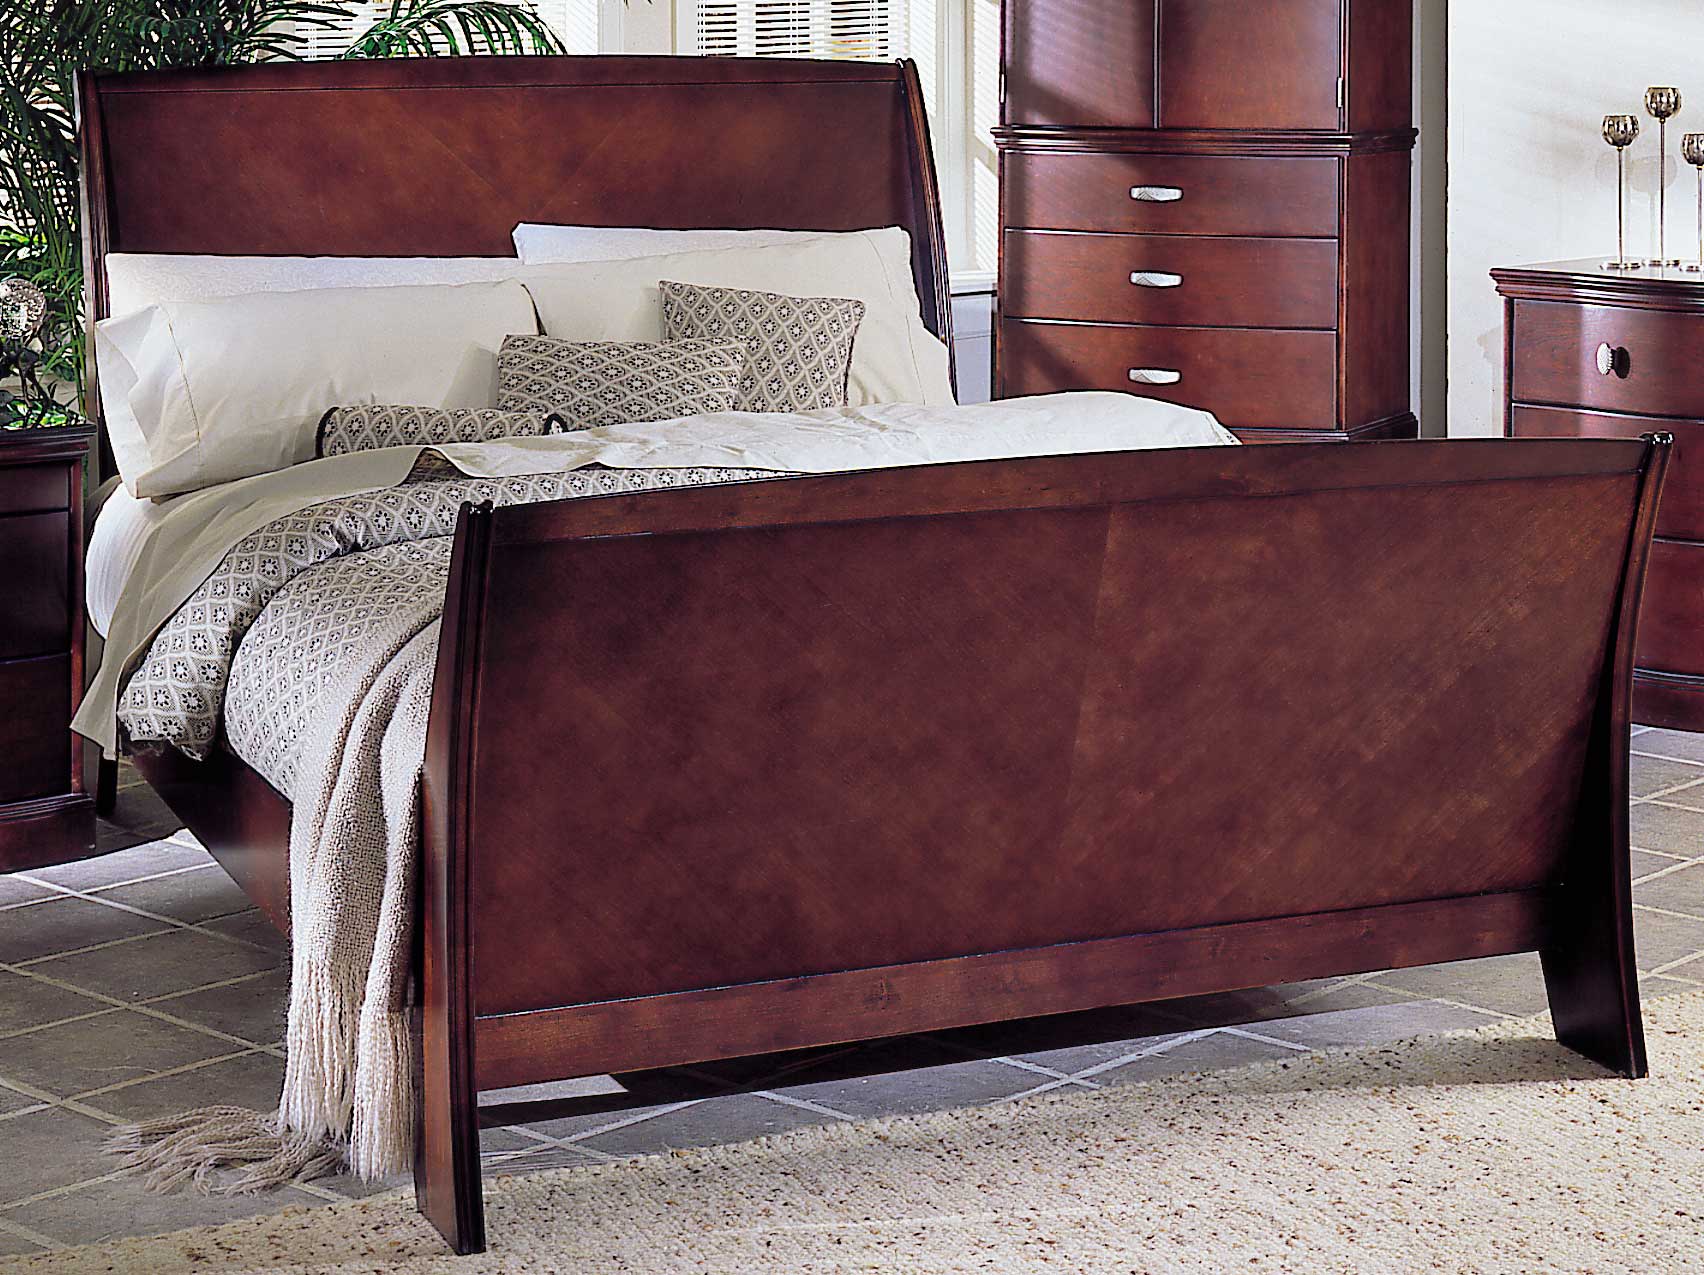 Homelegance 5th Avenue Bed with Wood Rails